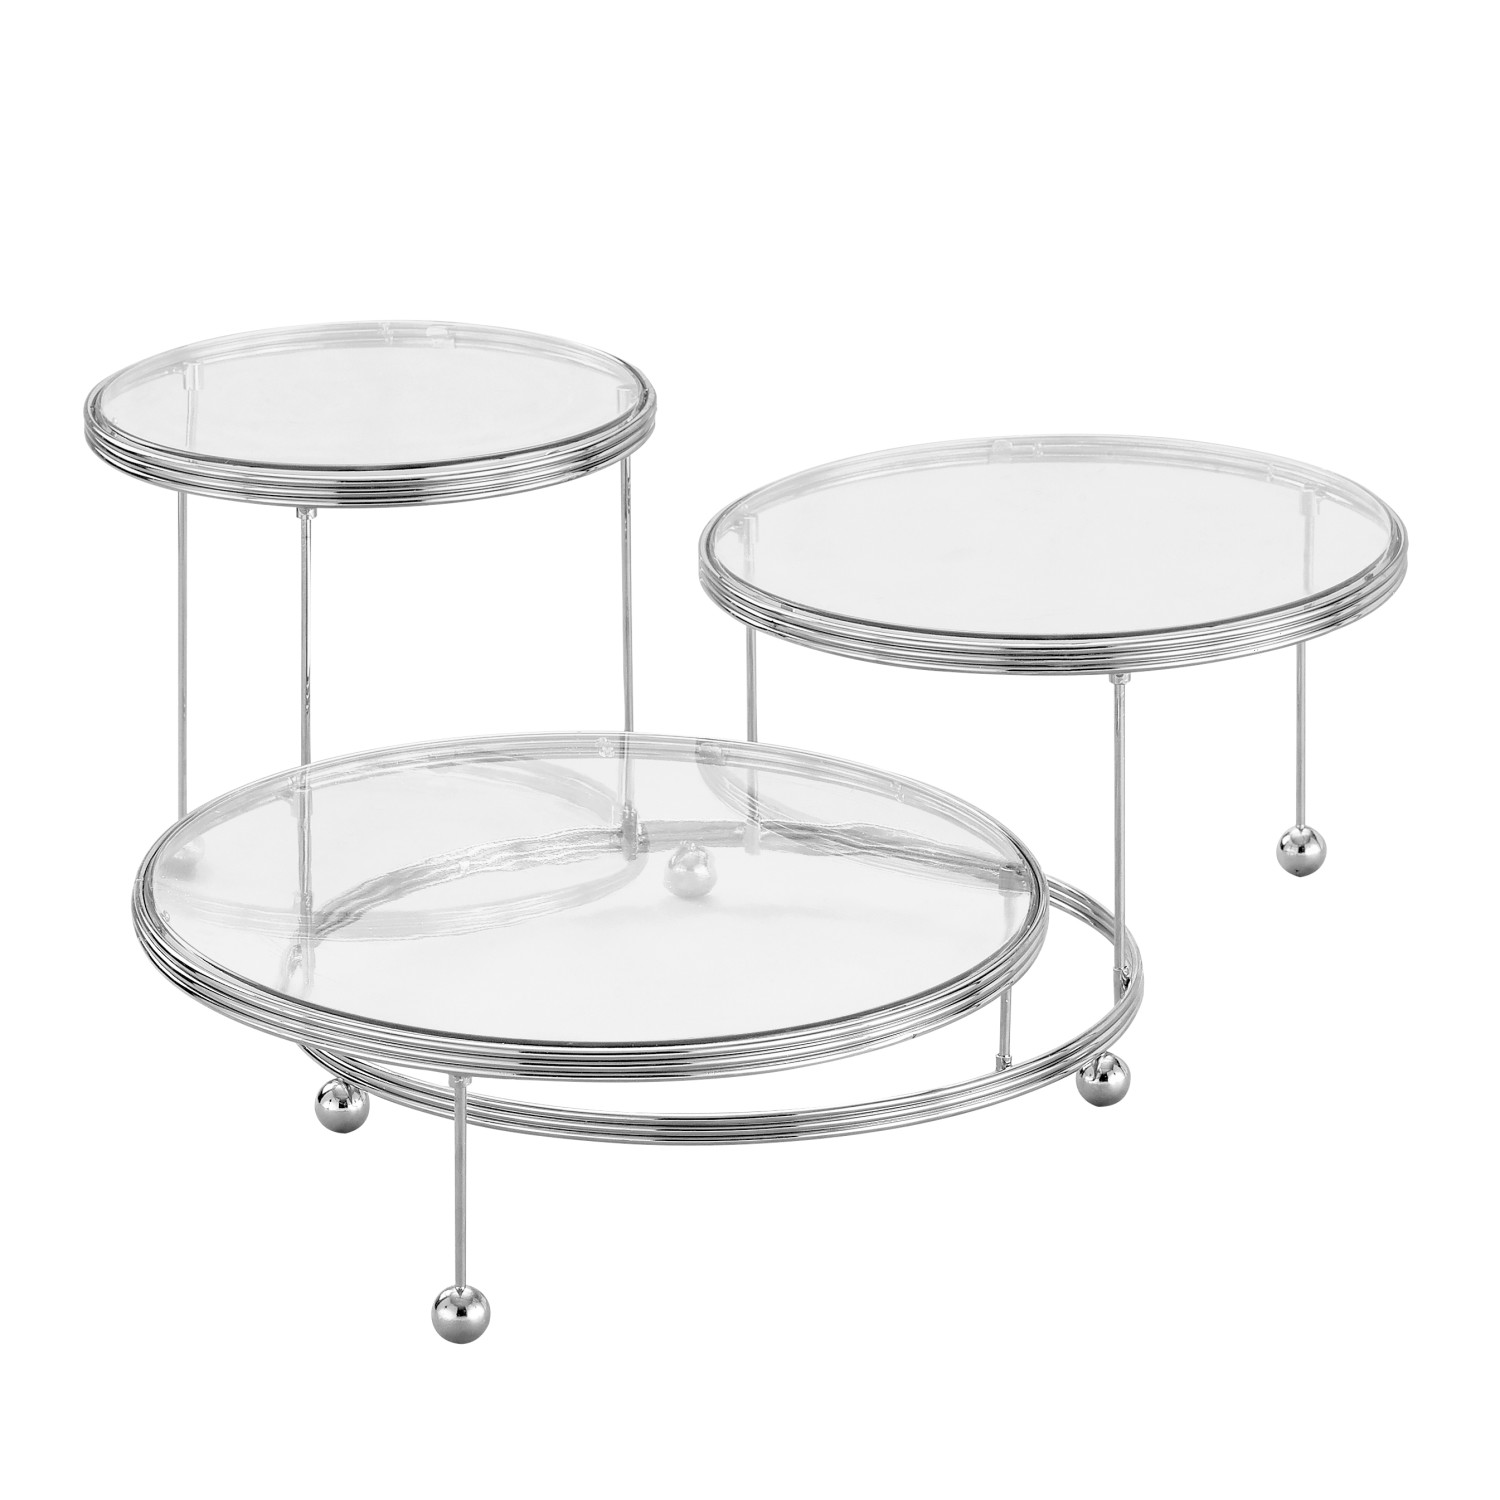 3 Tier Crystal Cake Stand / Dessert Tower – R & B Import